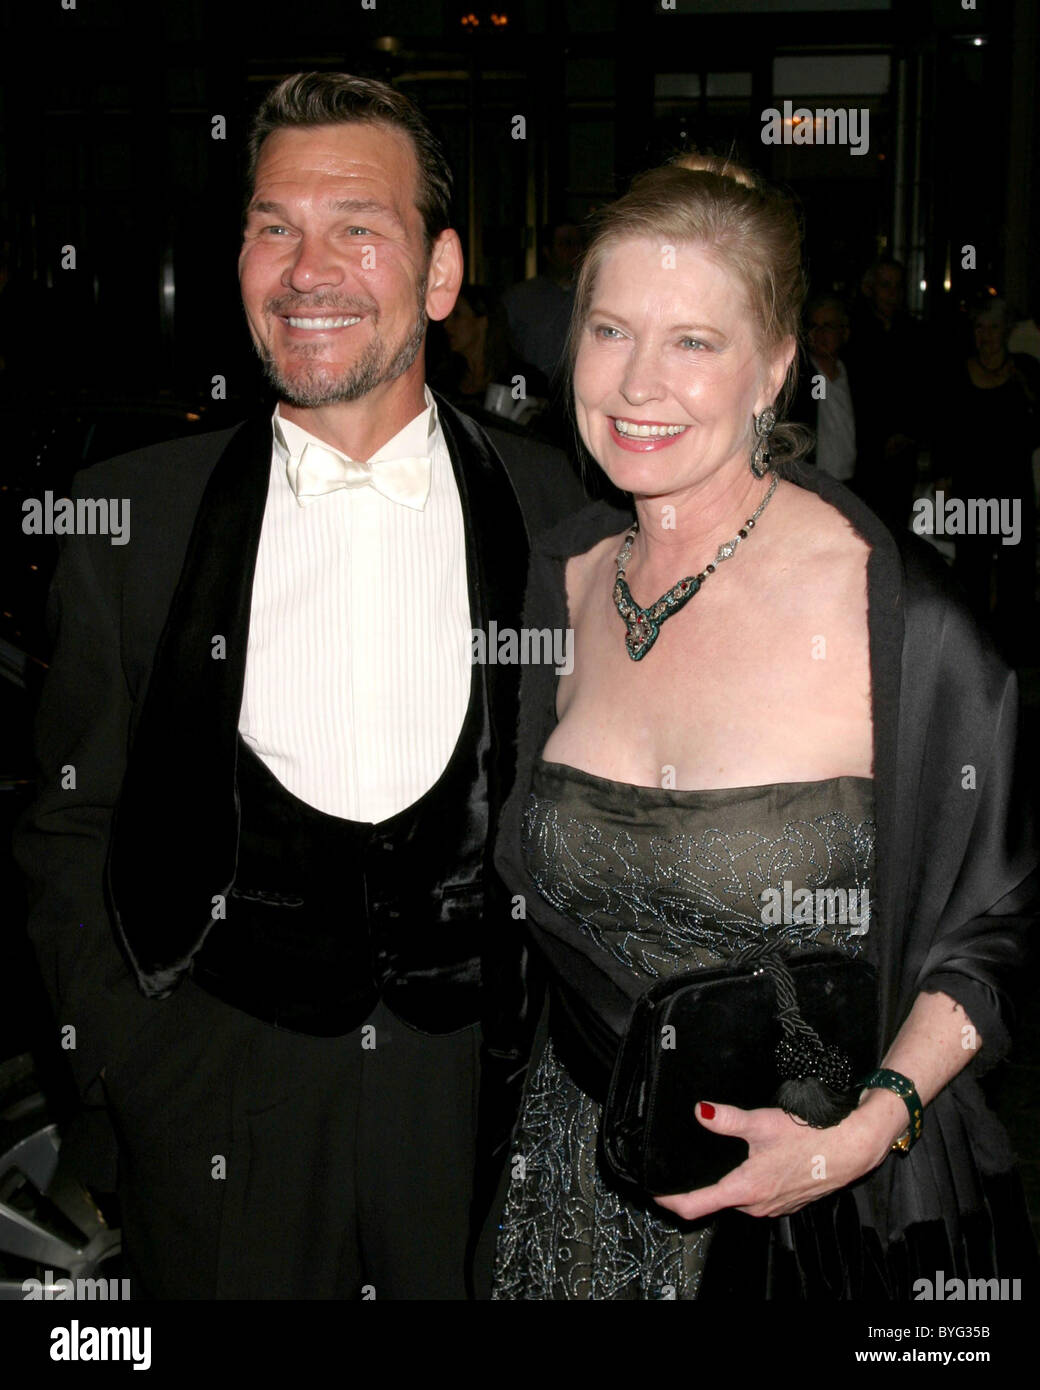 Patrick Swayze and Wife Lisa Neimi 9th Annual Costume Designer's Guild Awards Gala Regent Beverly Wilshire Hotel Beverly Hills, Stock Photo